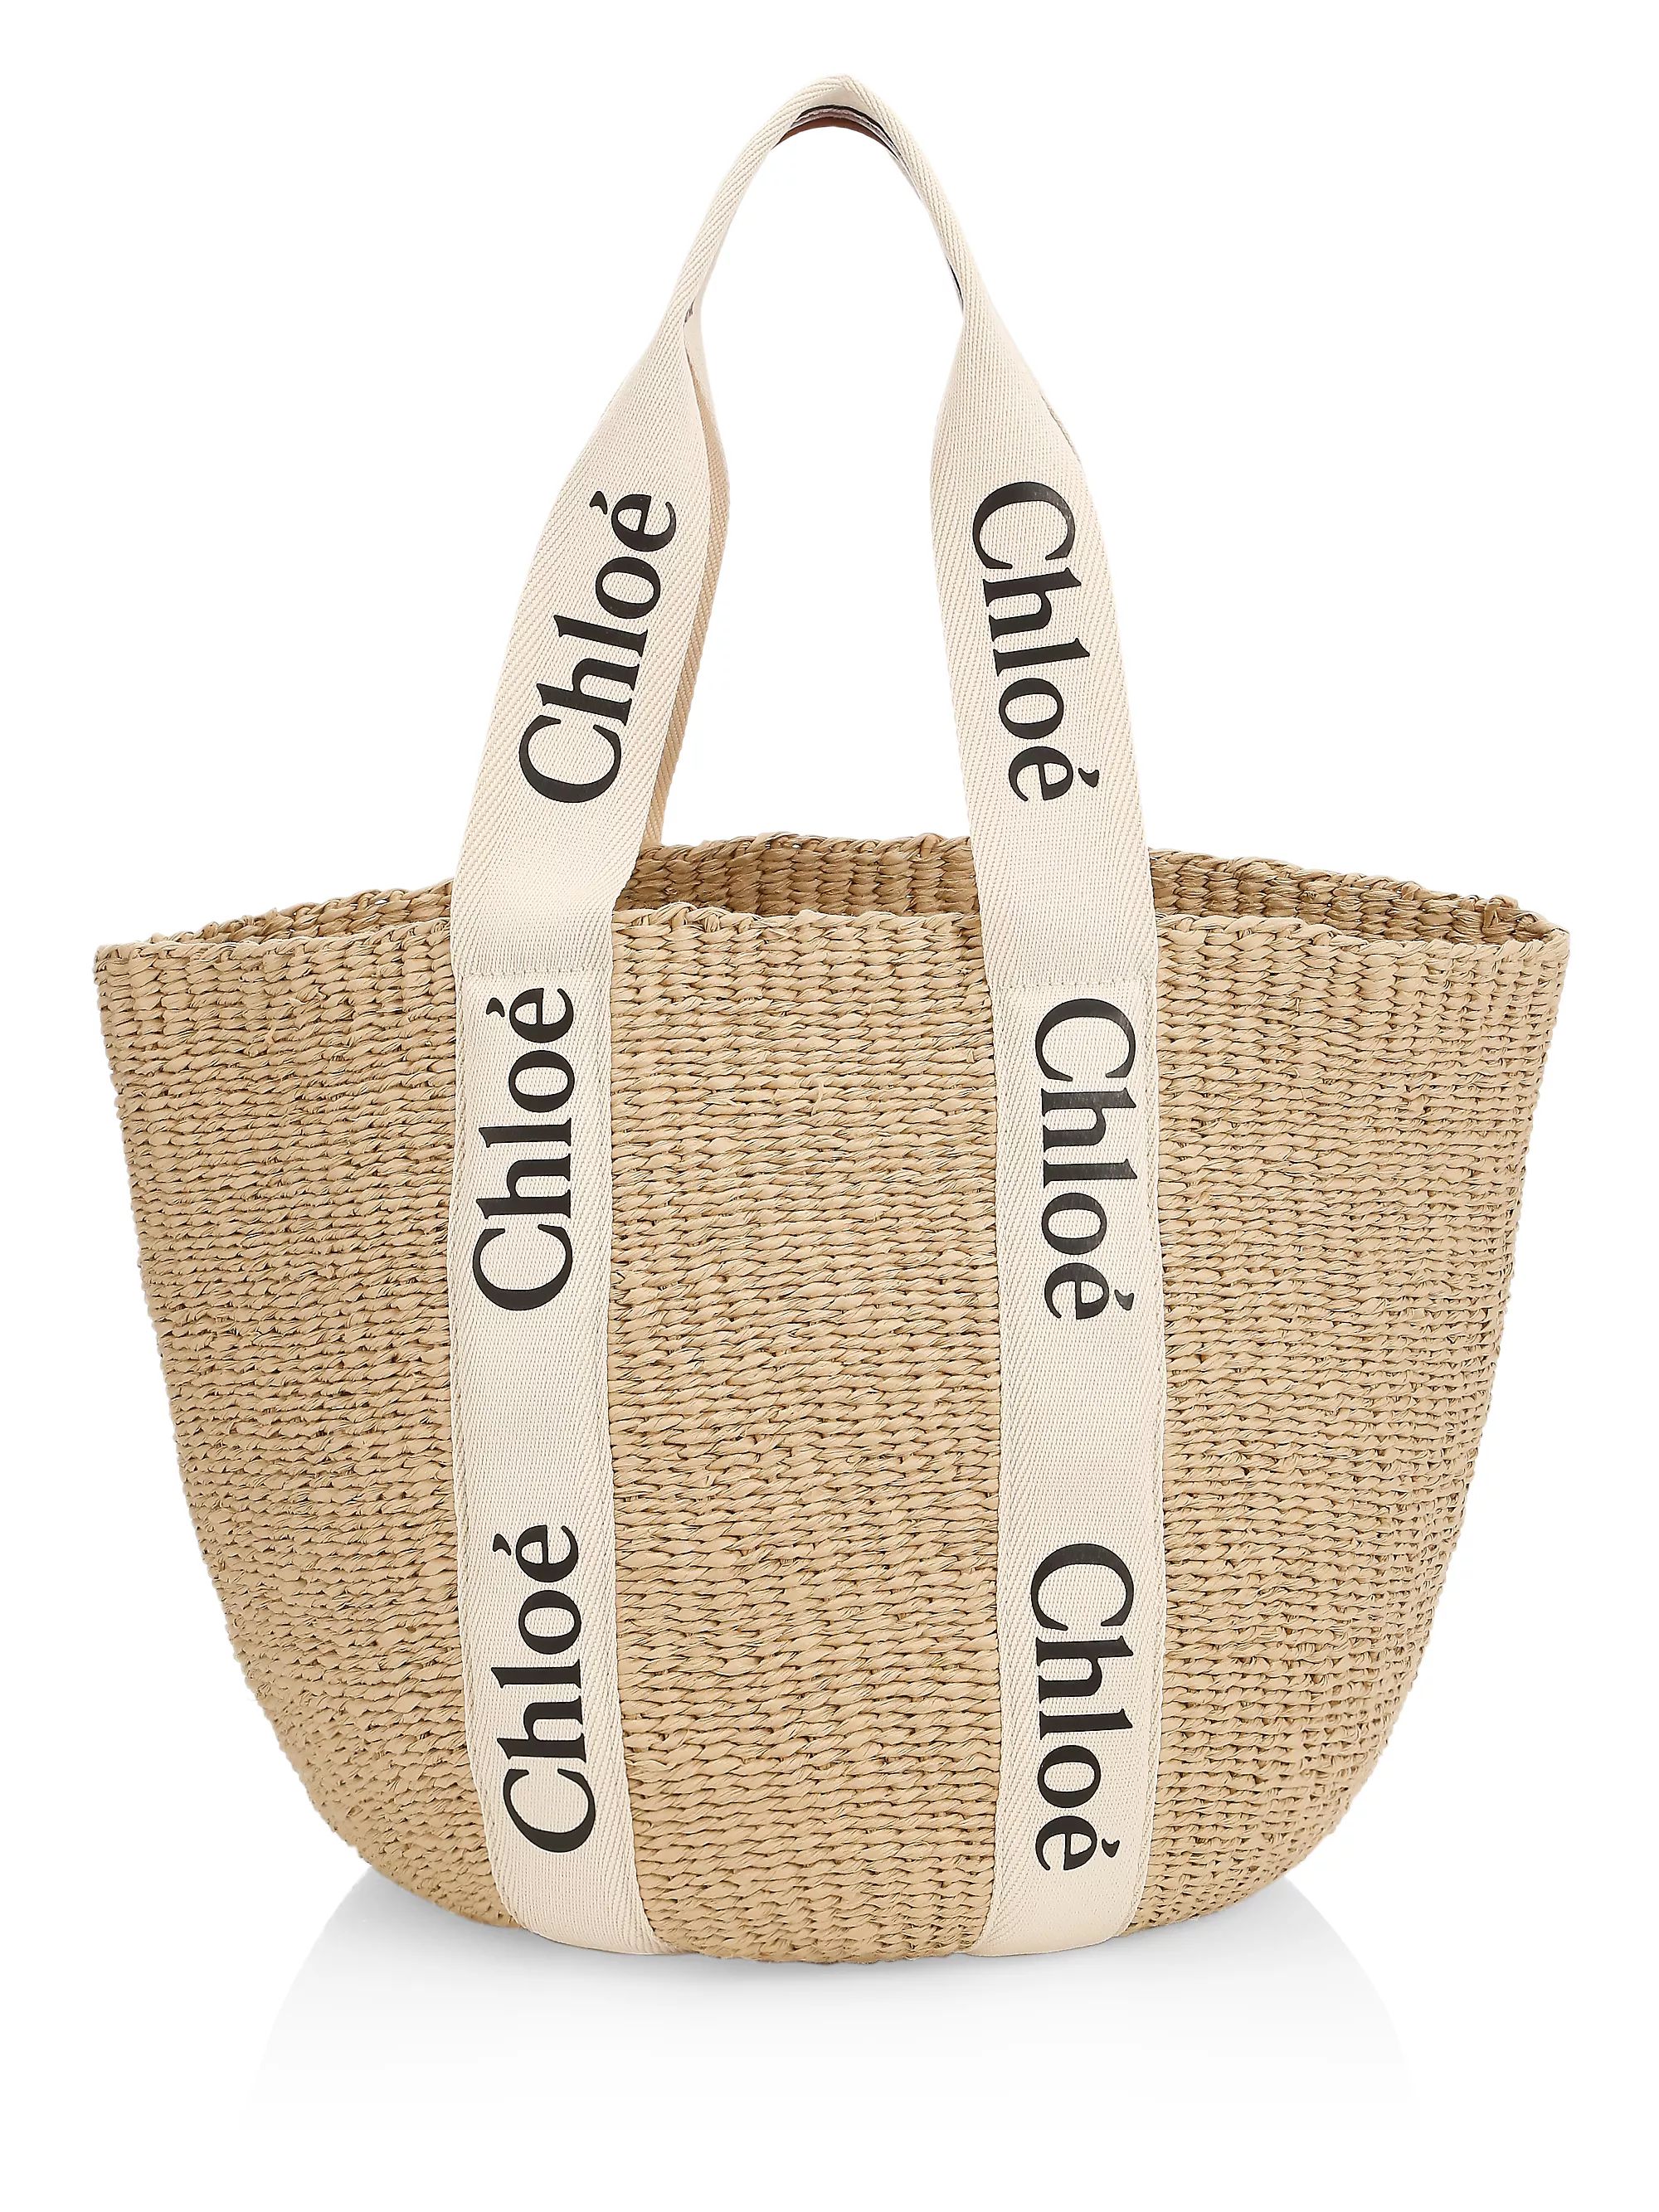 Shop By CategoryTotesChloéSmall Woody Basket BagRating: 5 out of 5 stars1$890
            
     ... | Saks Fifth Avenue